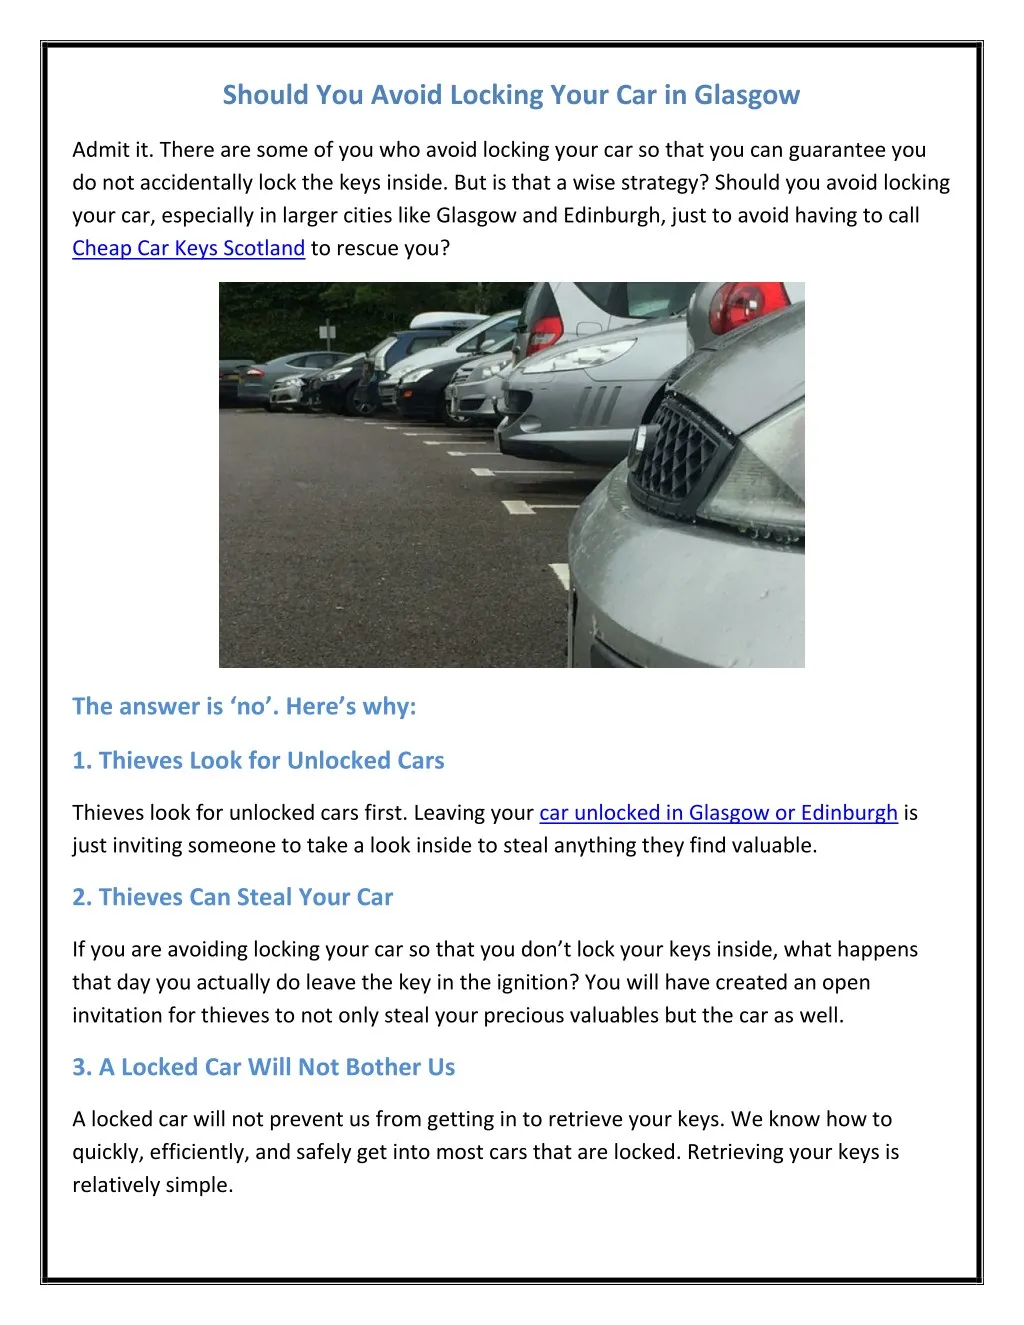 should you avoid locking your car in glasgow